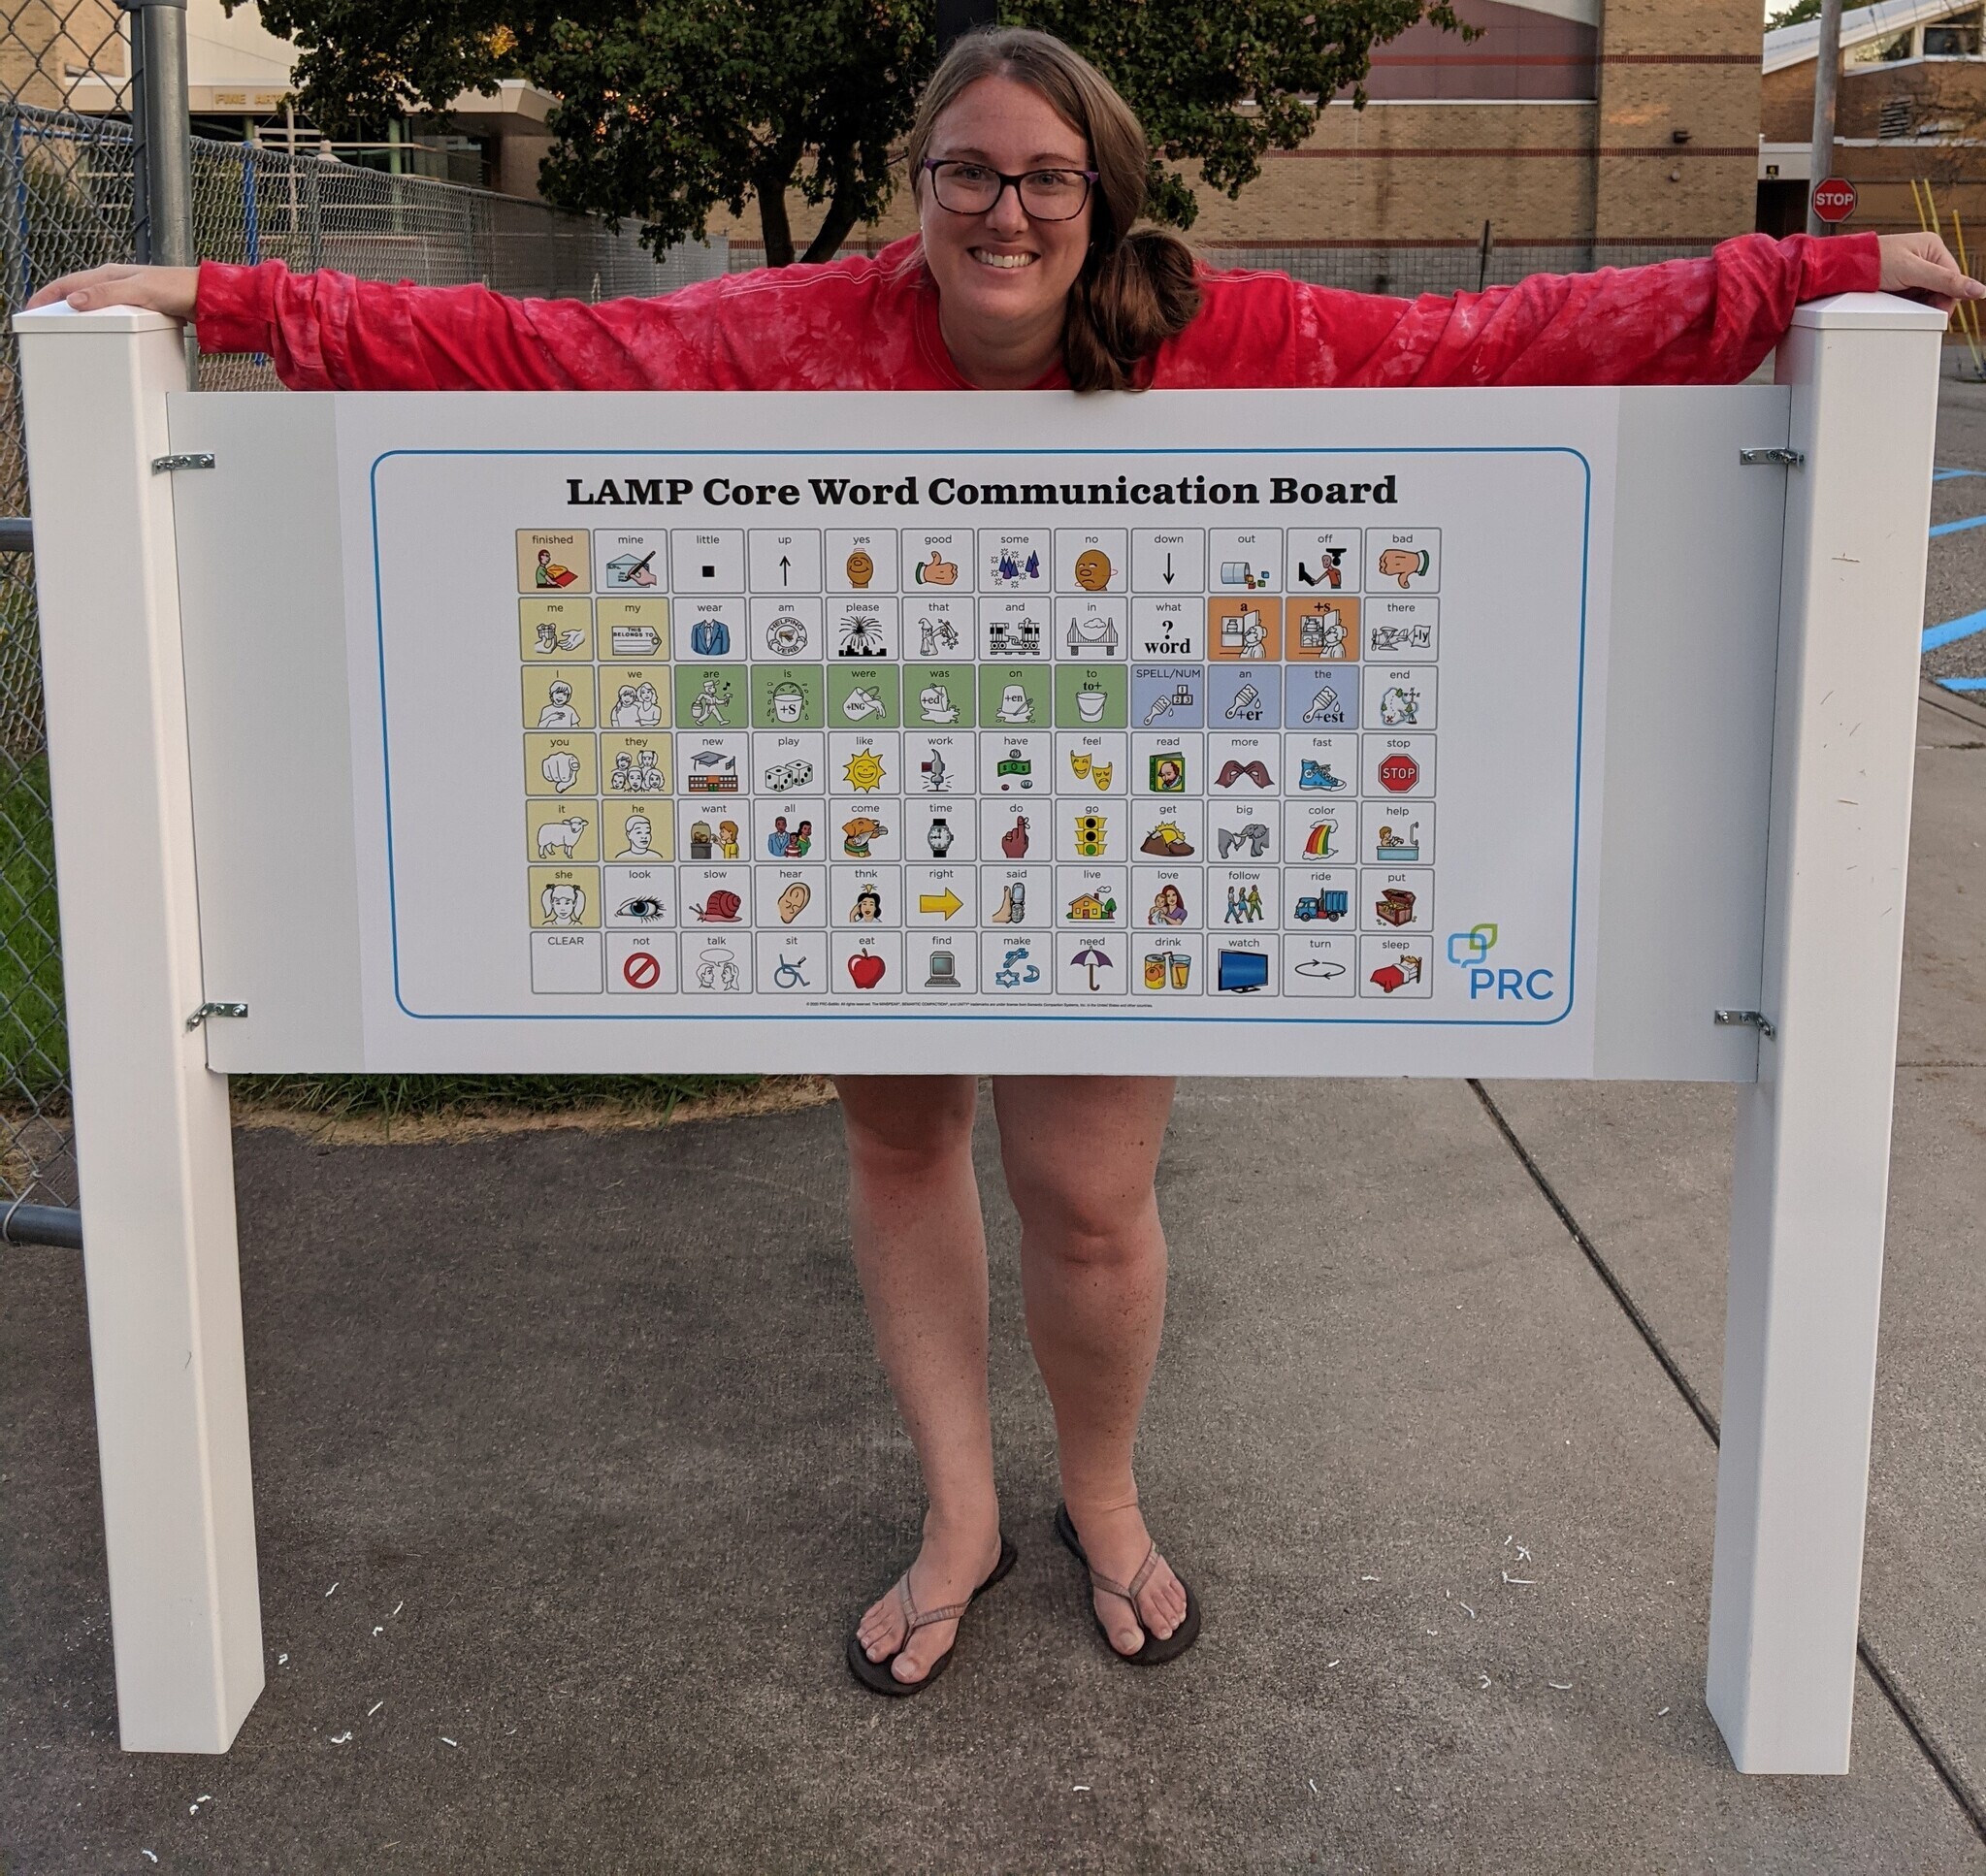 Core Communication signs with symbols to help staff and students communicate and understand on the Elementary playgrounds